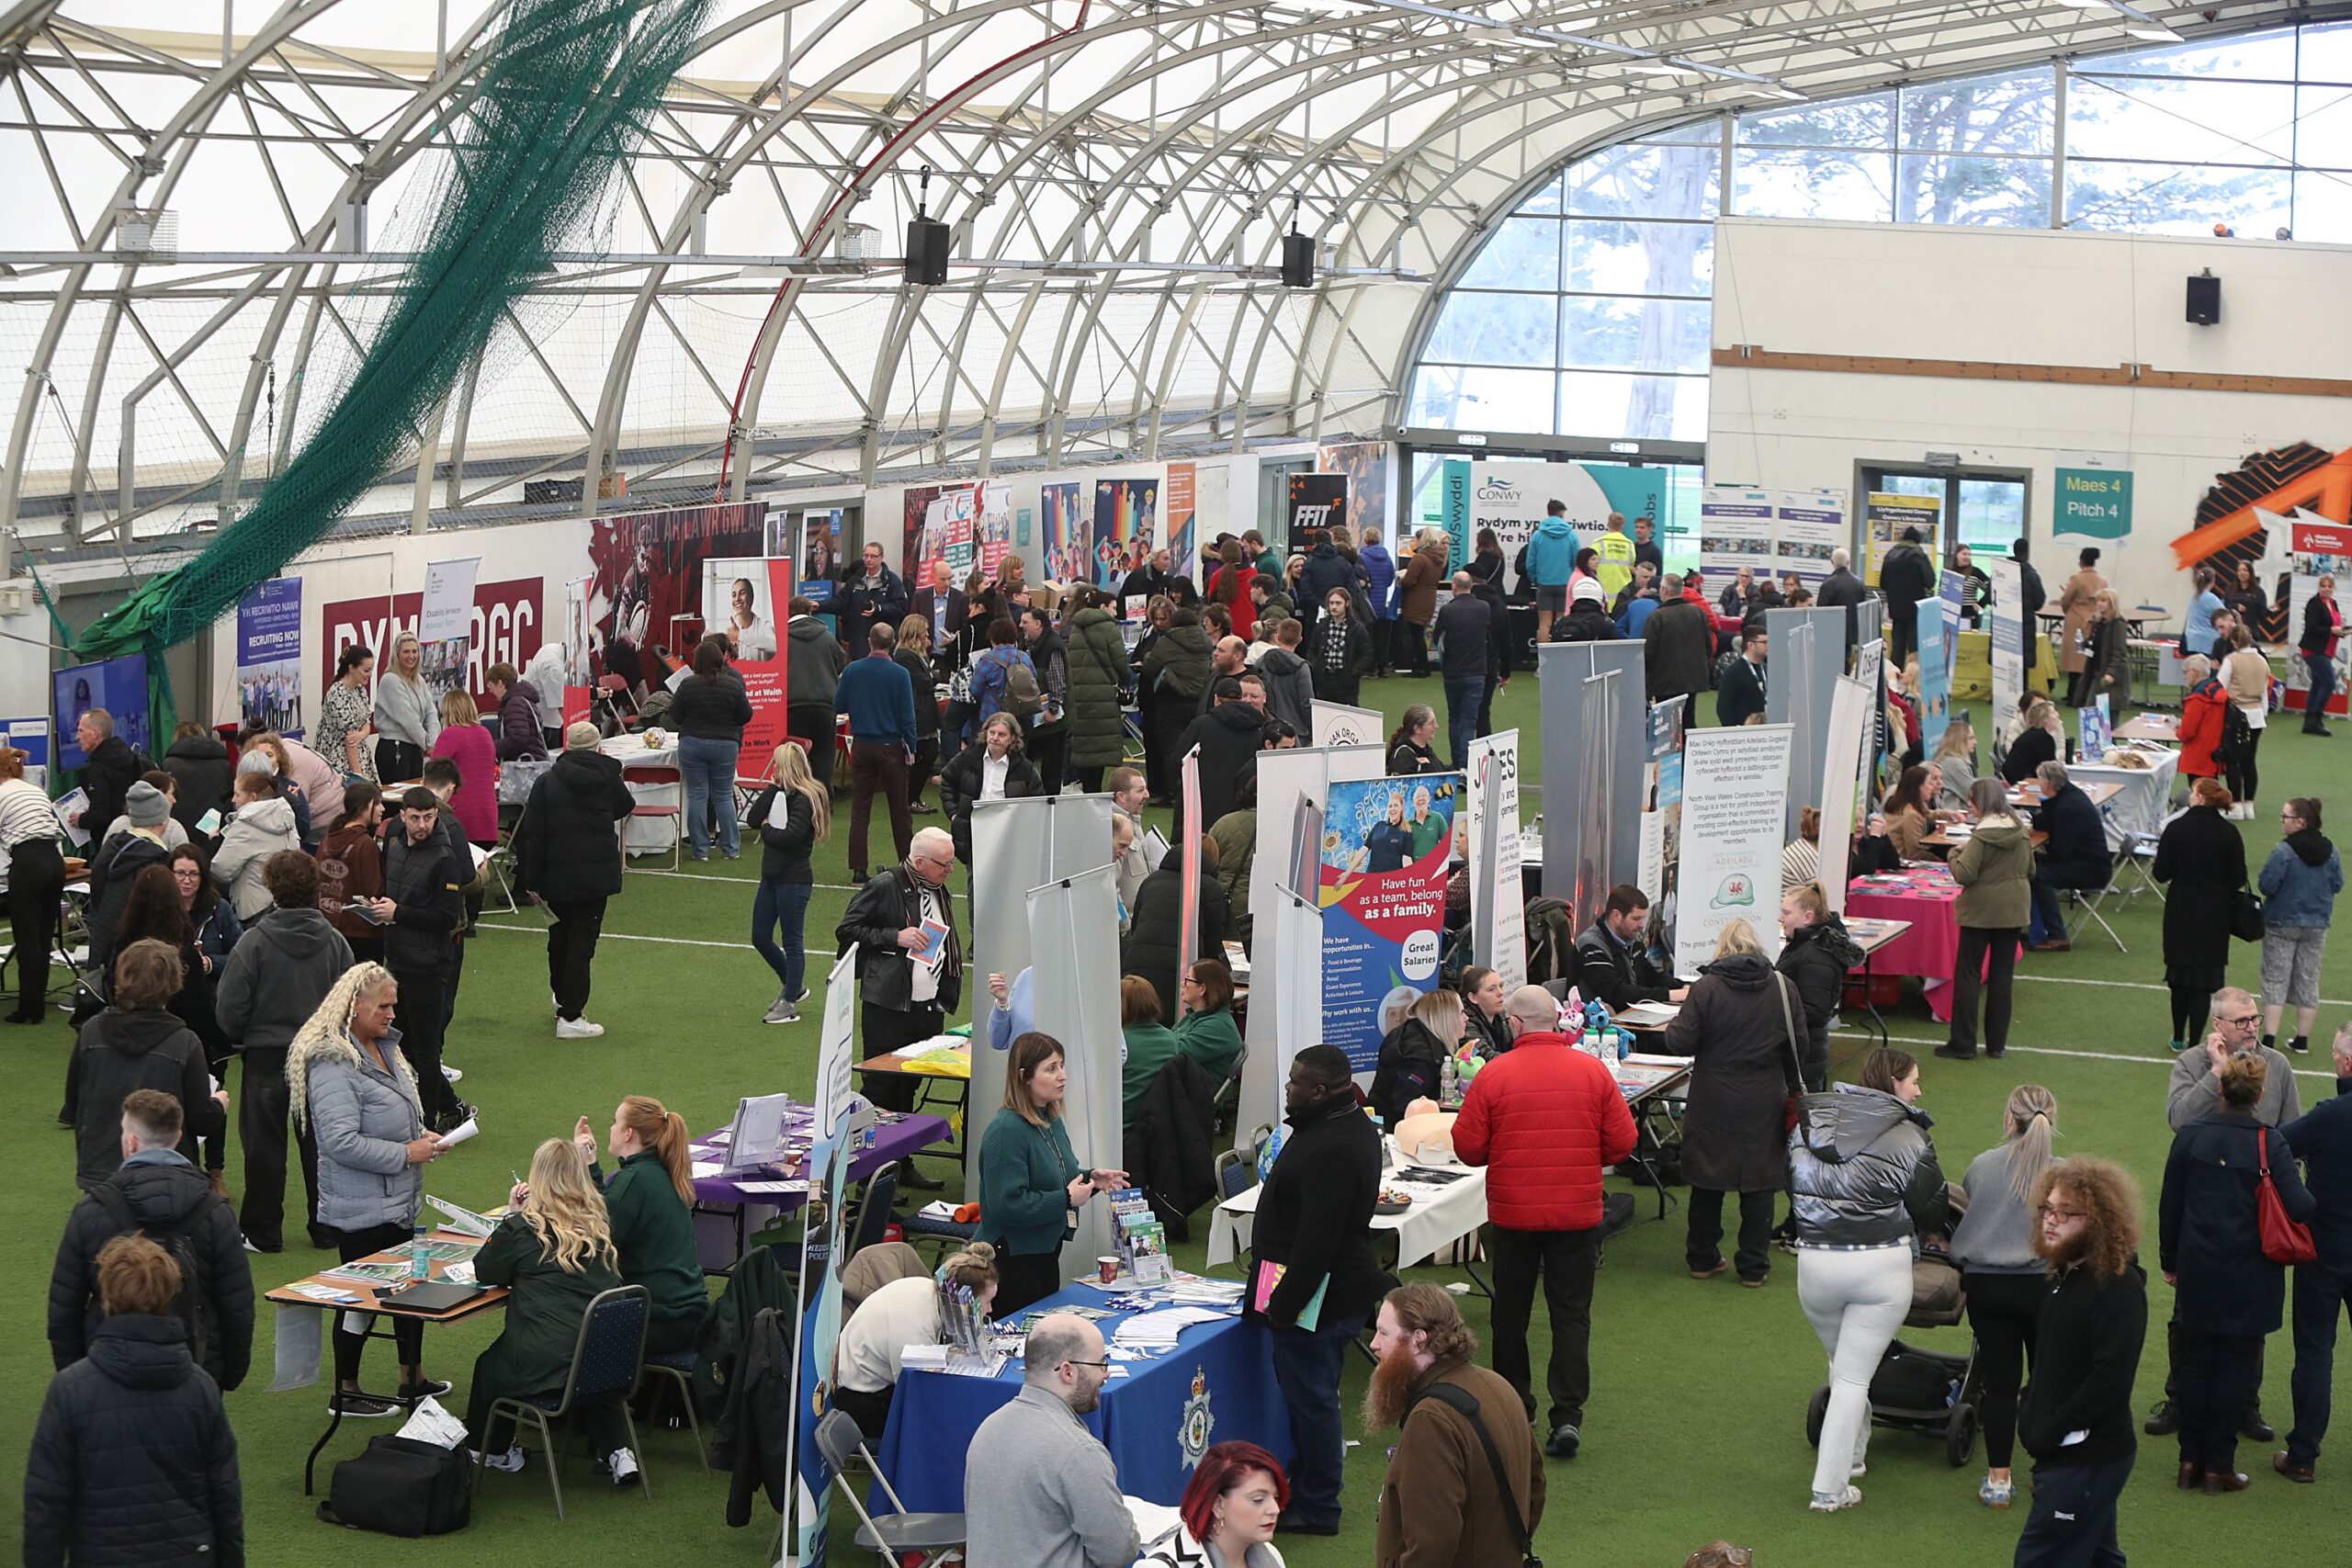 1,000+ jobseekers attend returning North Wales employment expo